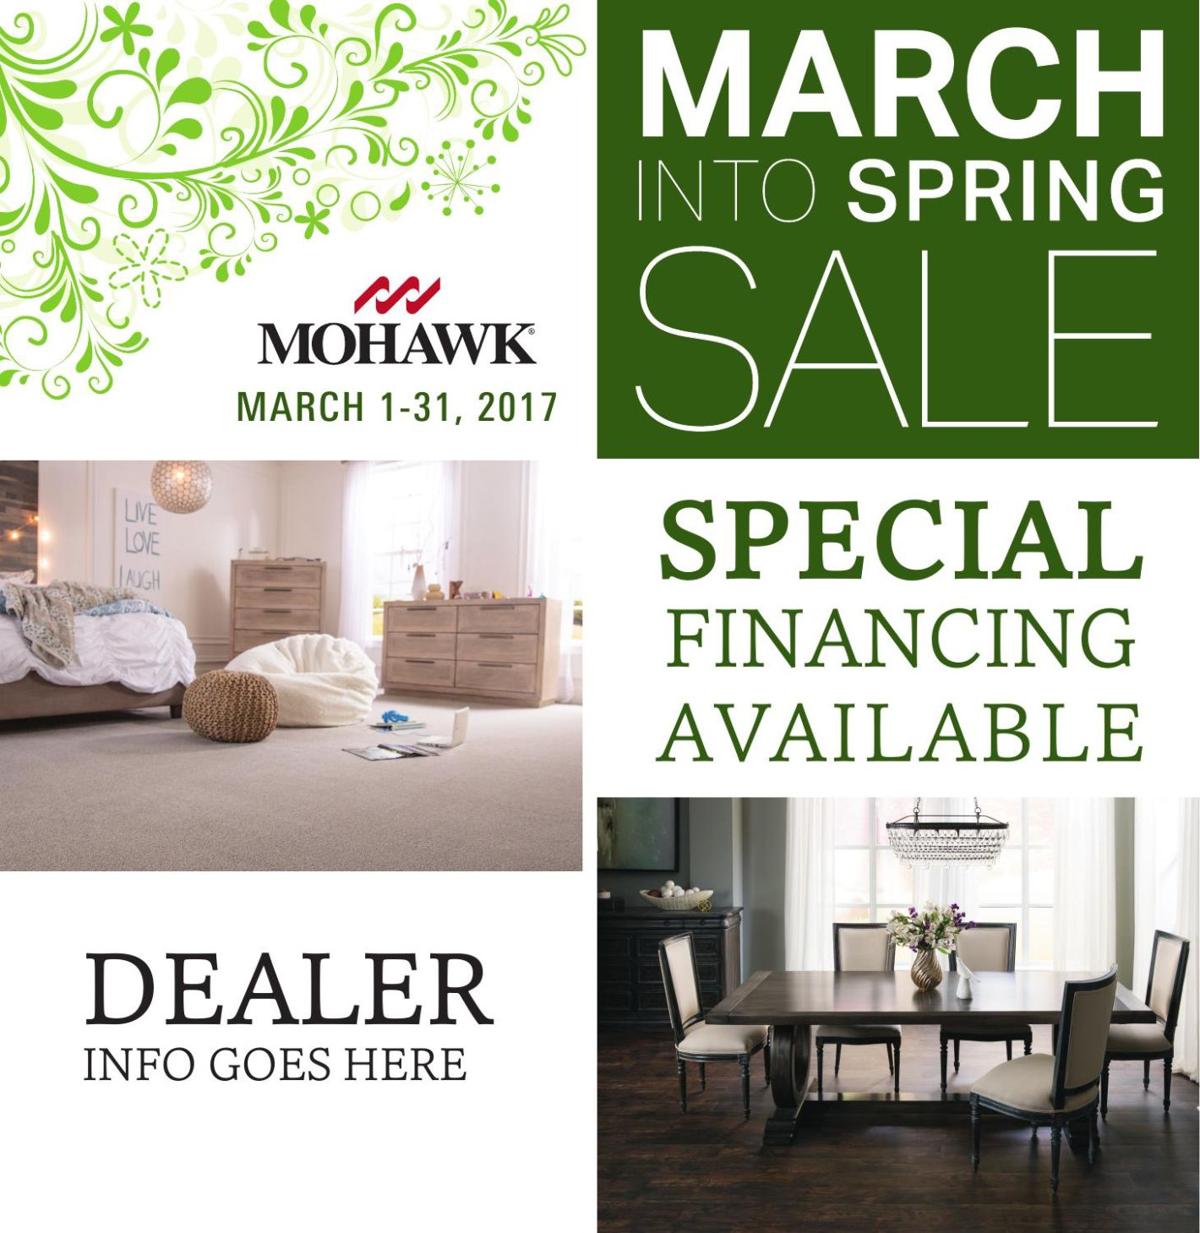 Mohawk March Into Spring Sale Gvpennysaver Com